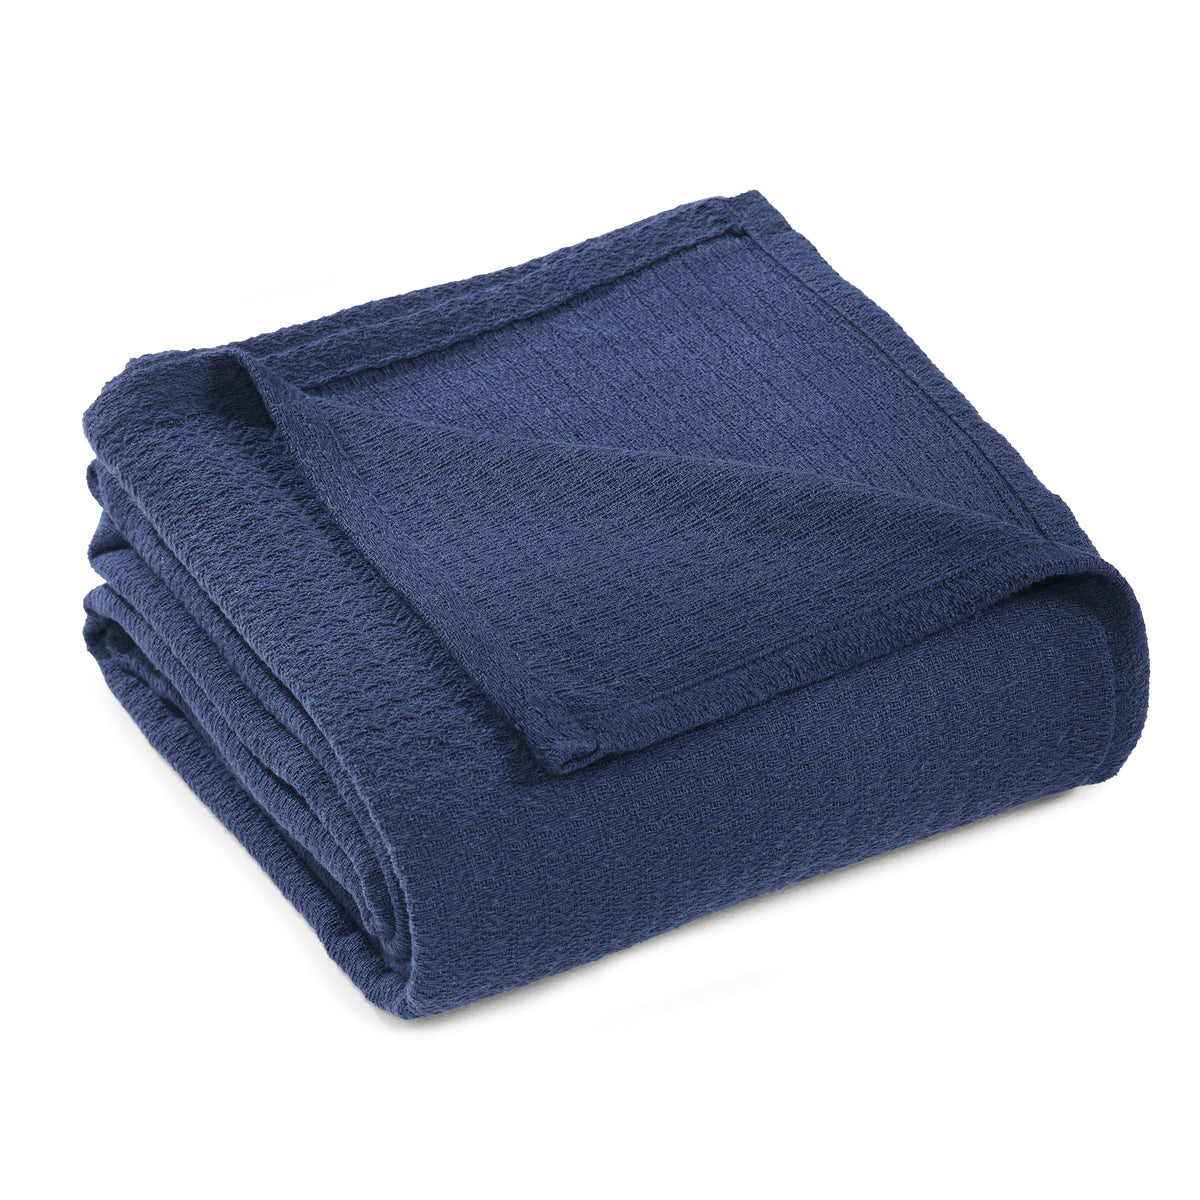 Waffle Weave Honeycomb Knit Soft Solid Textured Cotton Blanket - Navy Blue